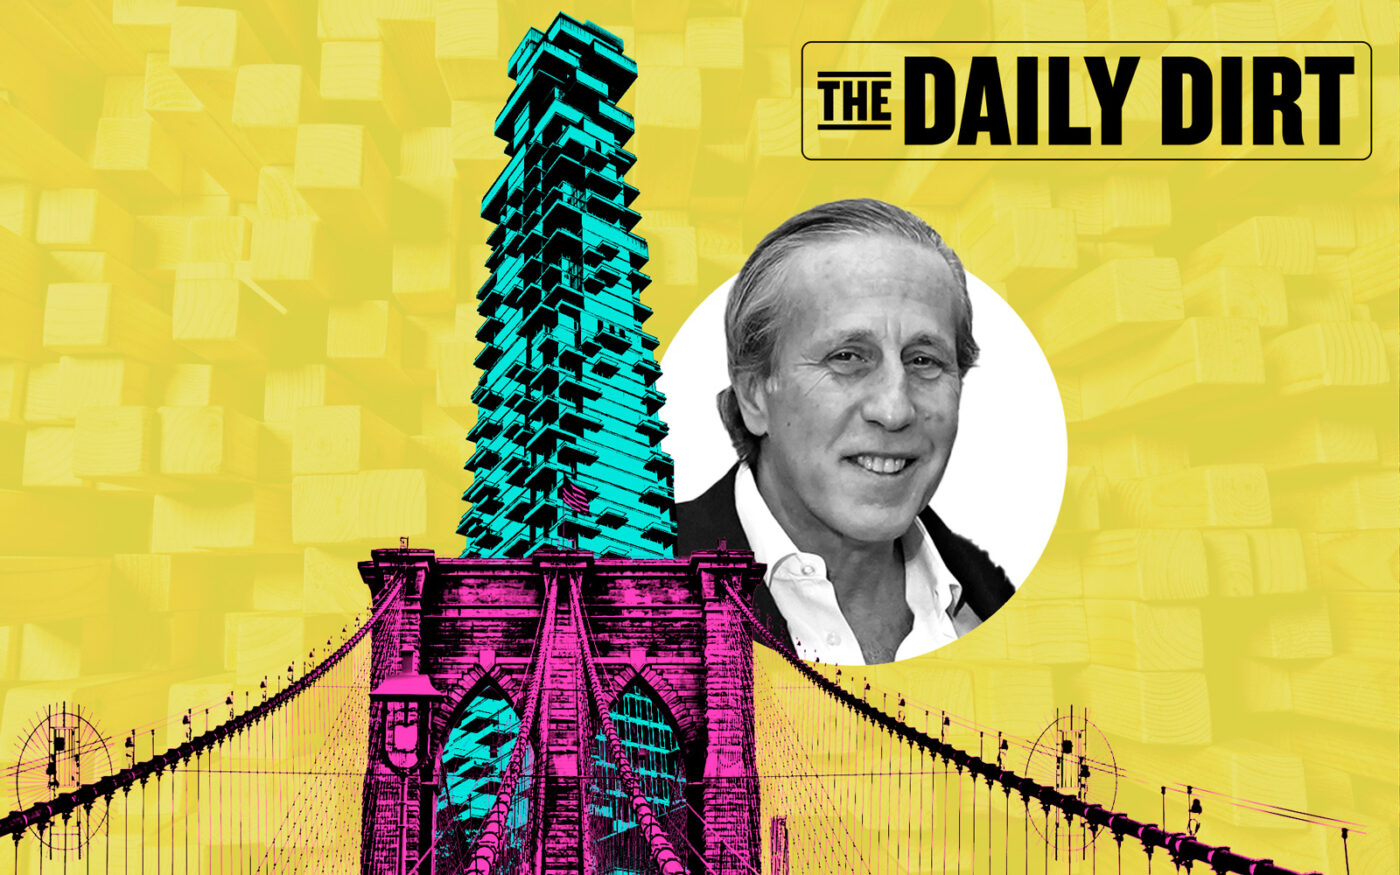 Daily Dirt: Why Brooklynites Fear the Next Jenga Building